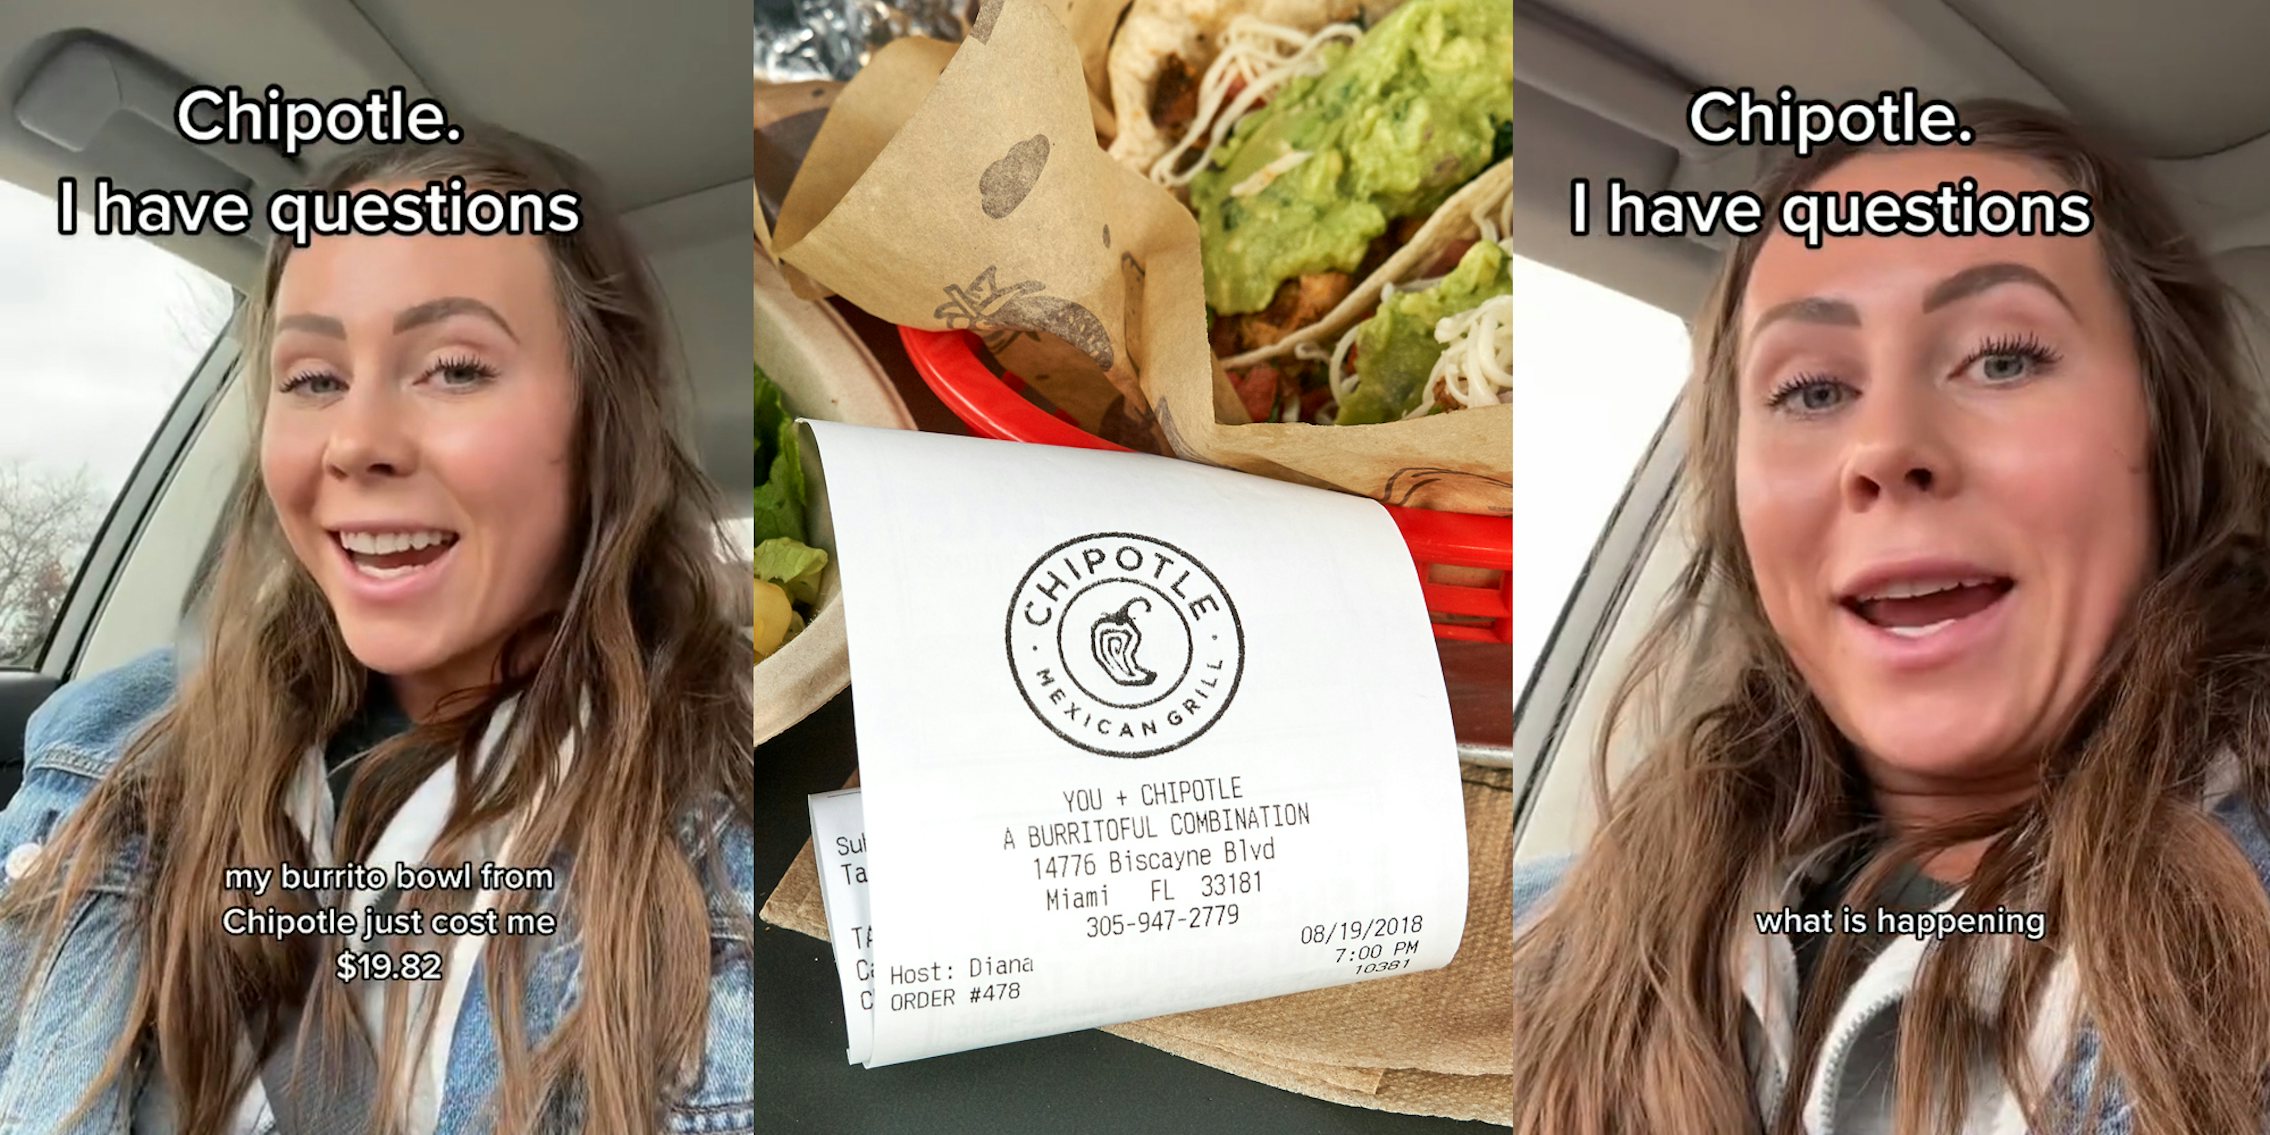 woman speaking in car with caption 'Chipotle. I have questions' 'my burrito bowl from Chipotle just cost me $19.82' (l) Chipotle receipt in front of food (c) woman speaking in car with caption 'Chipotle. I have questions' 'what is happening' (r)